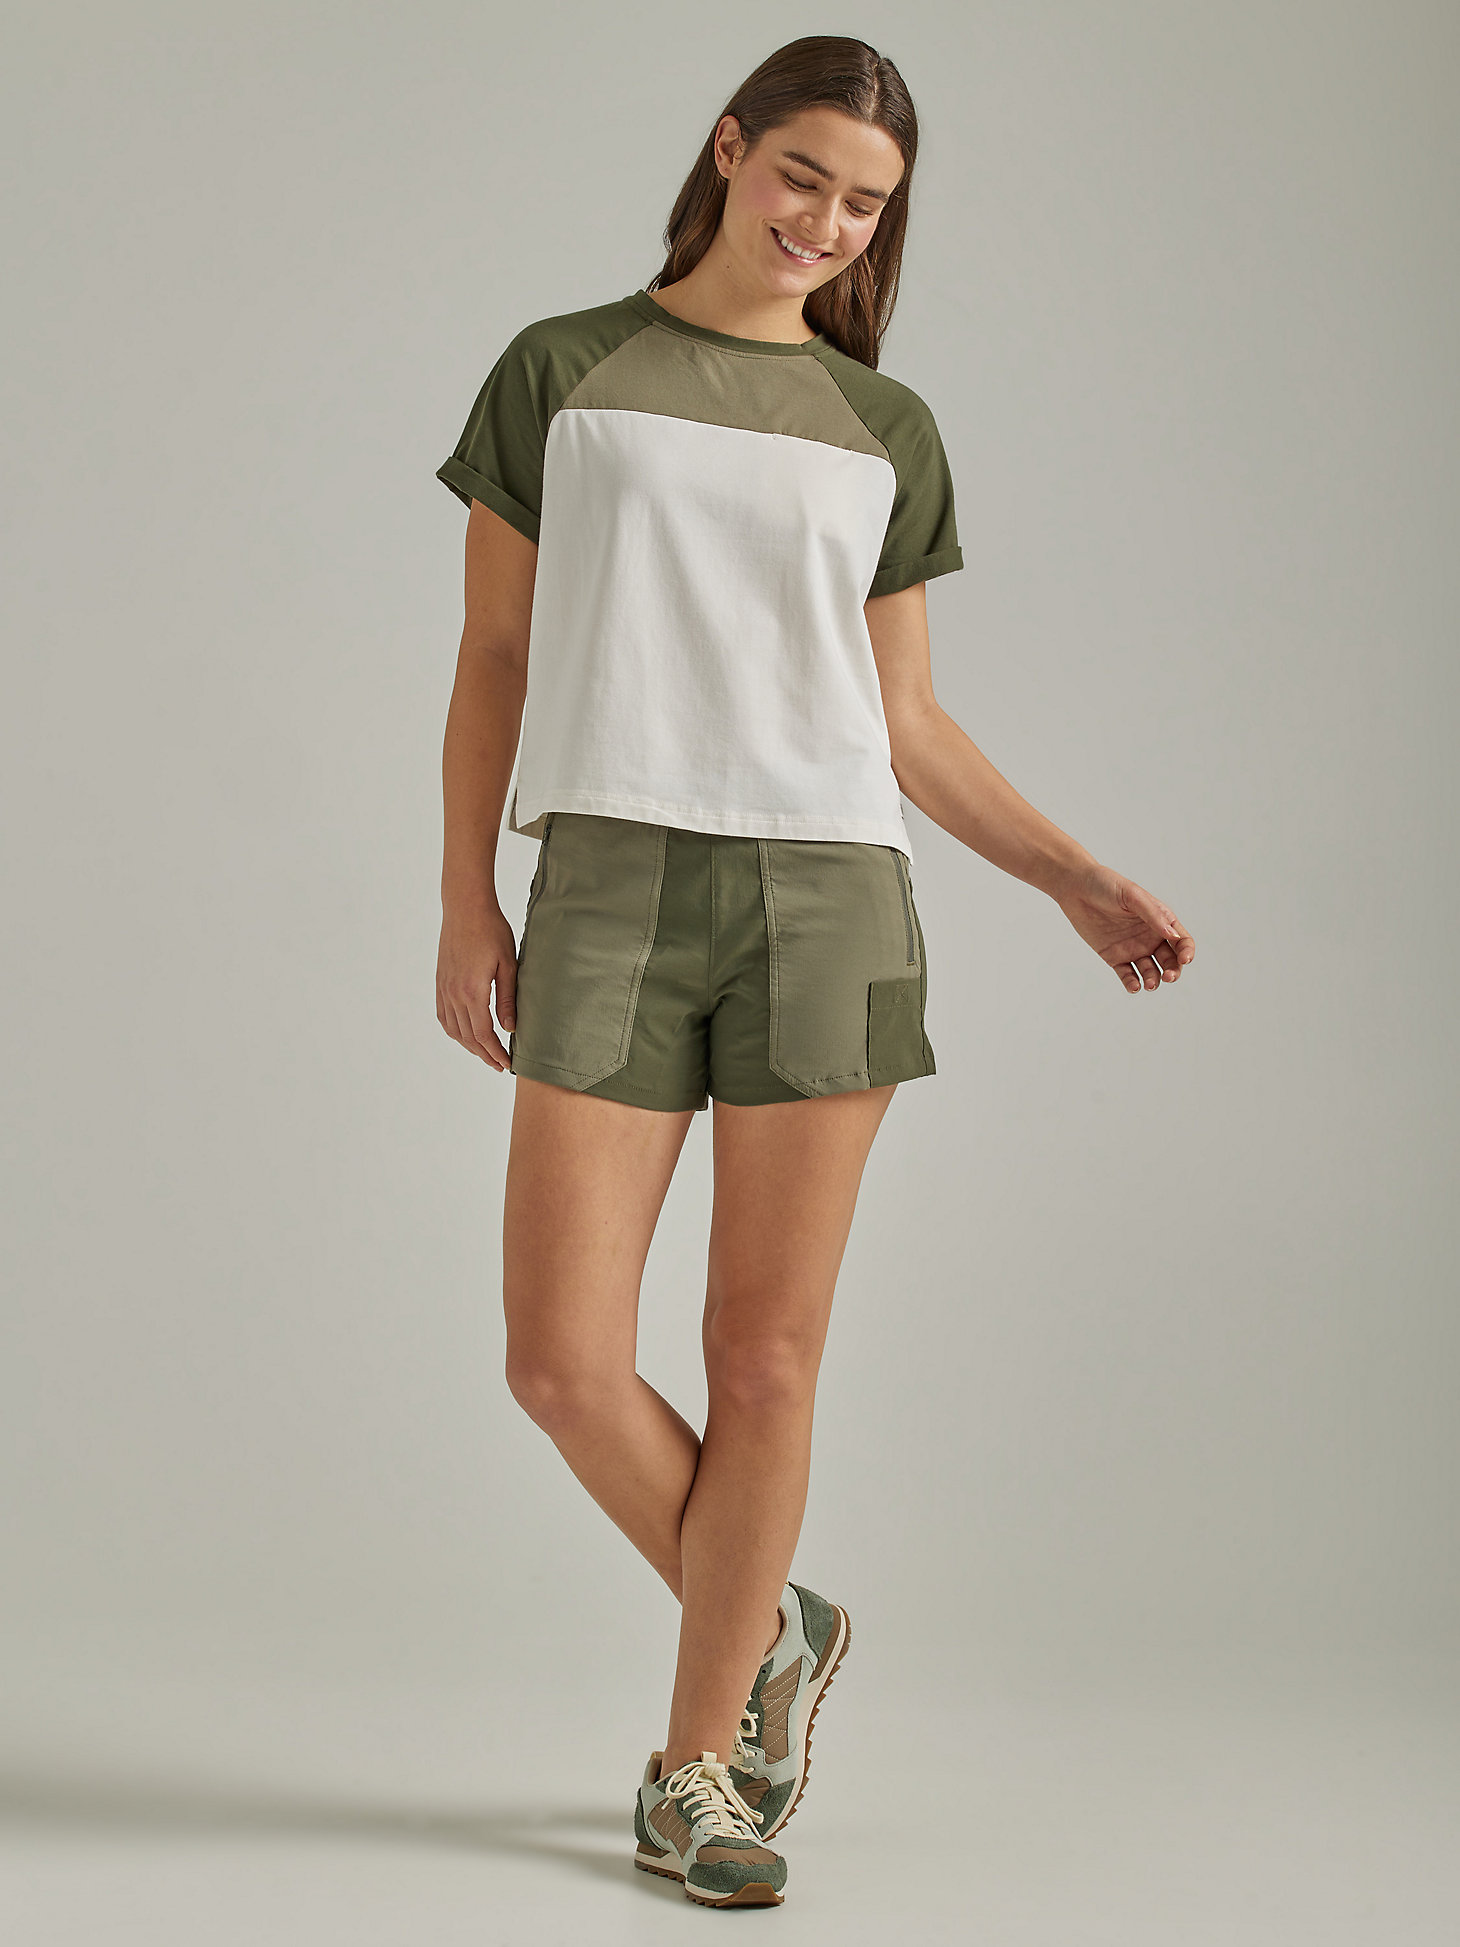 ATG By Wrangler® Women's Compass Tee in Dusty Olive alternative view 1